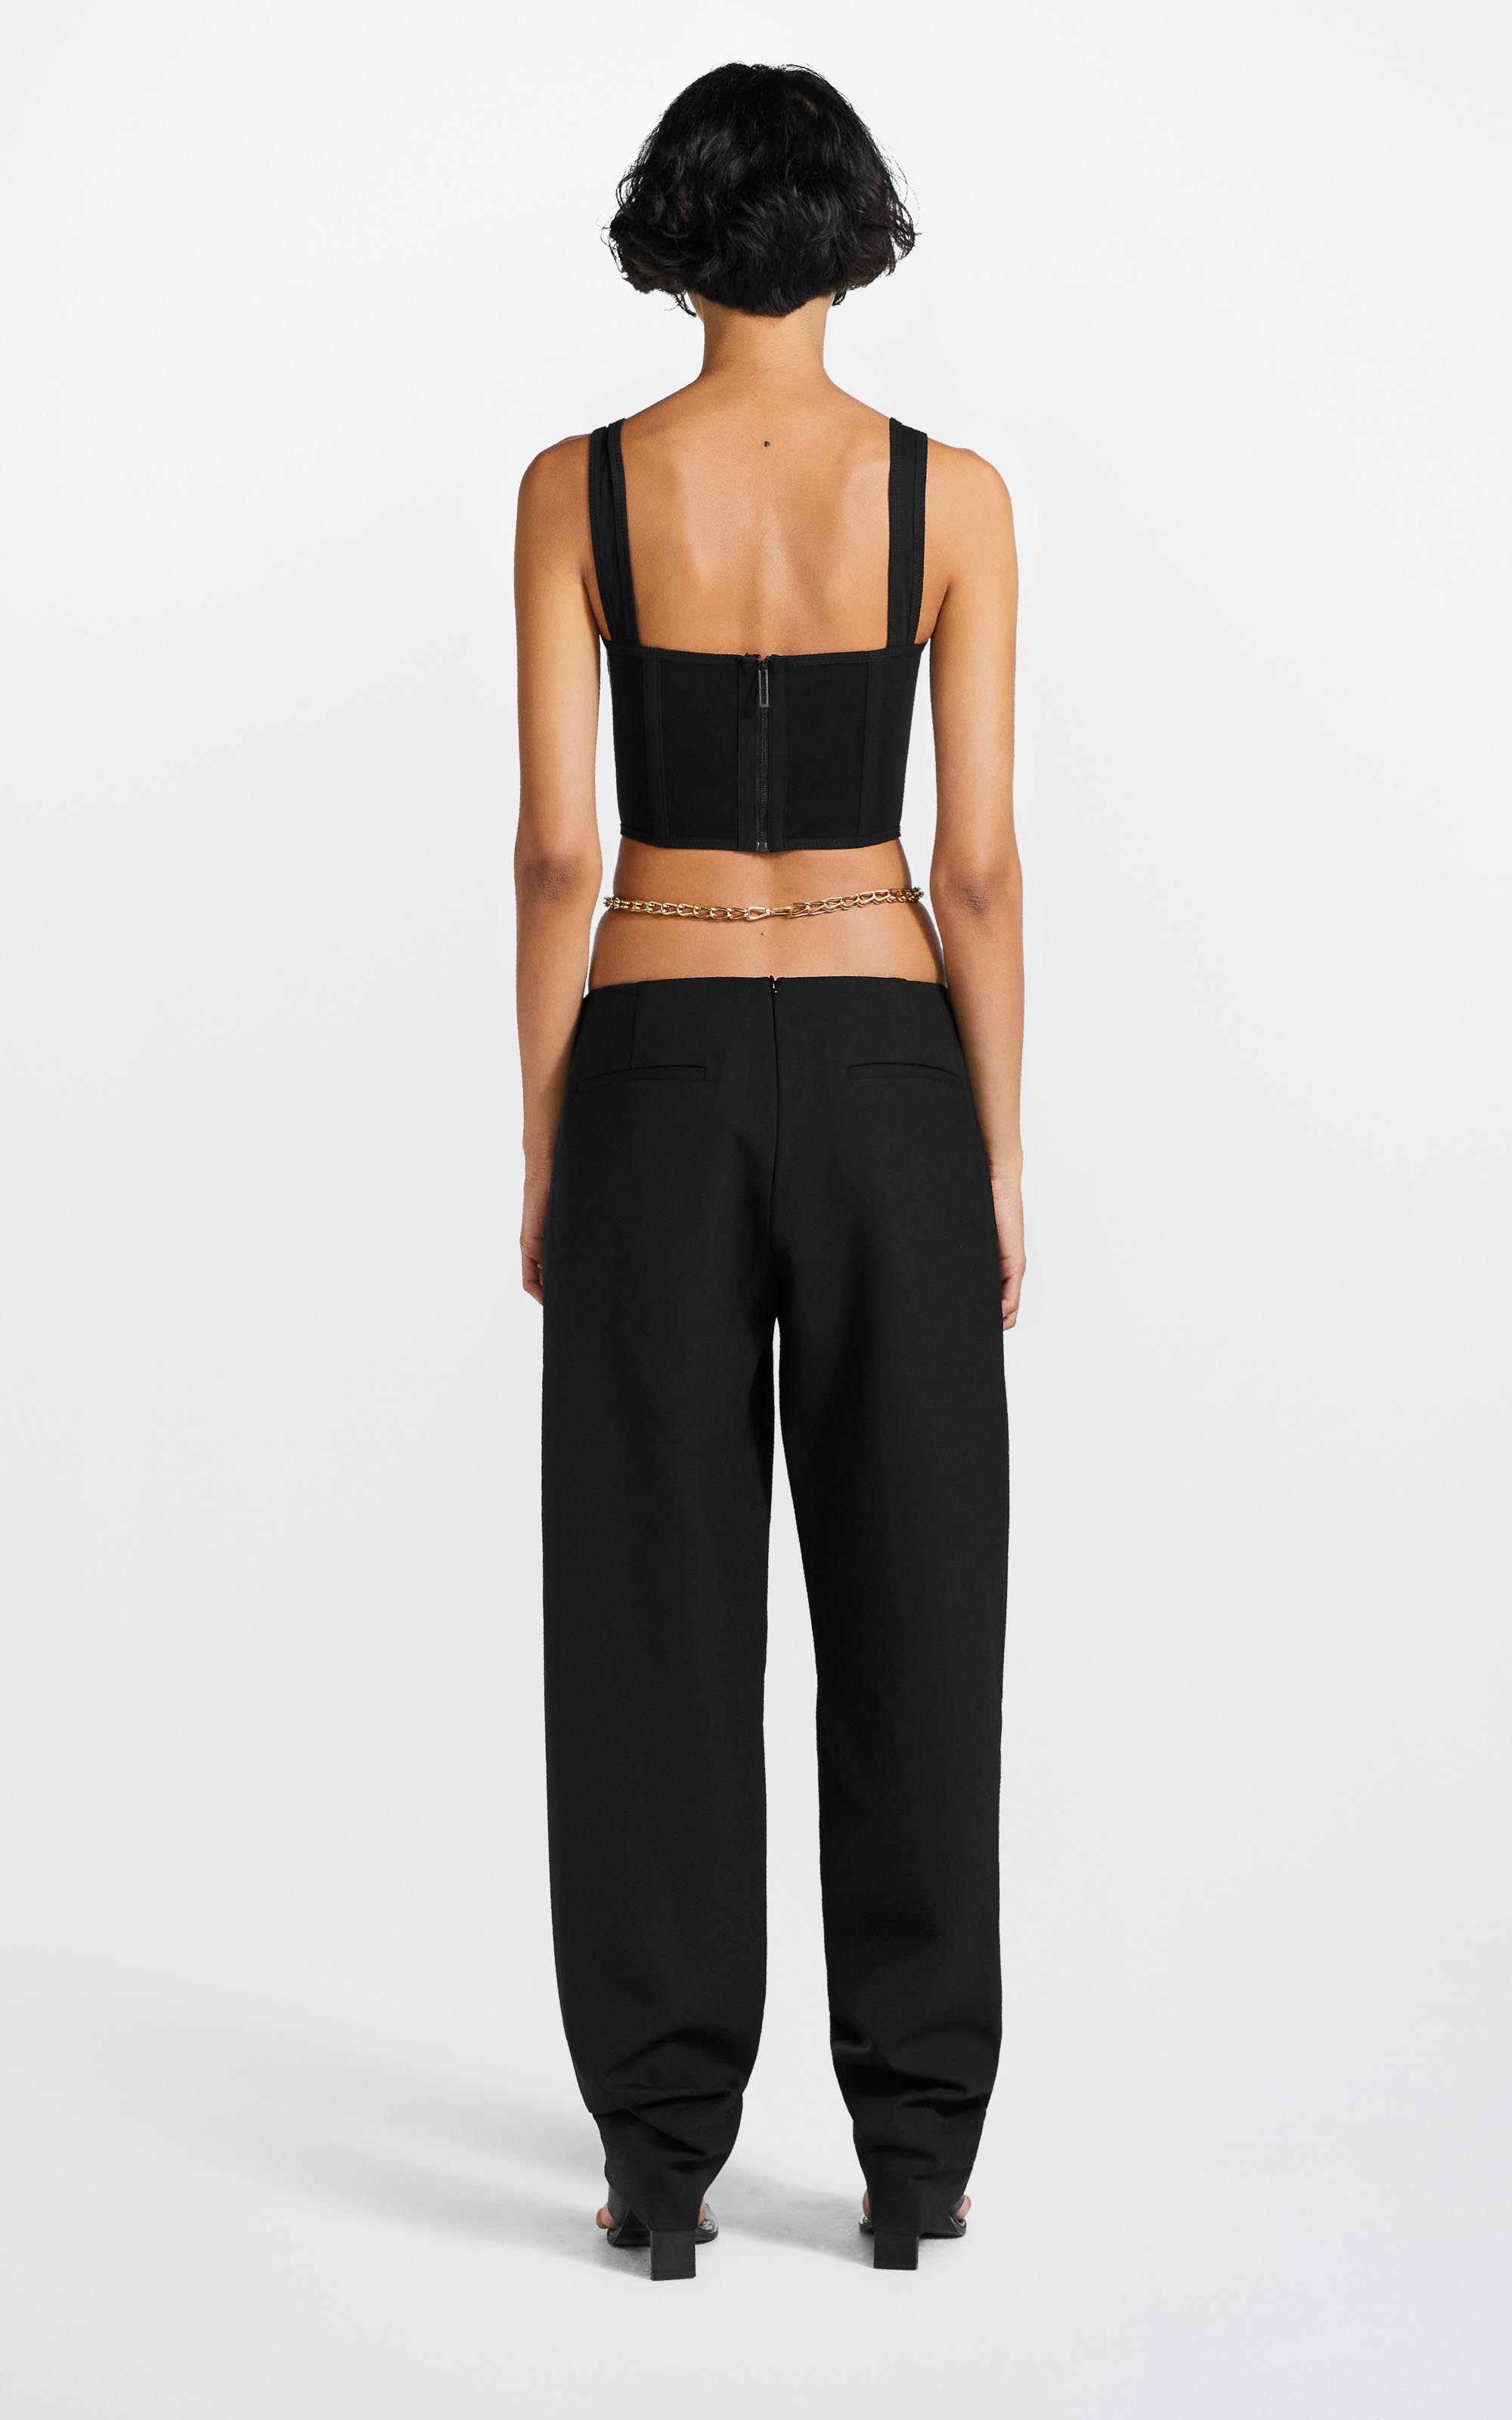 CHAIN SUSPEND PANT by Dion Lee